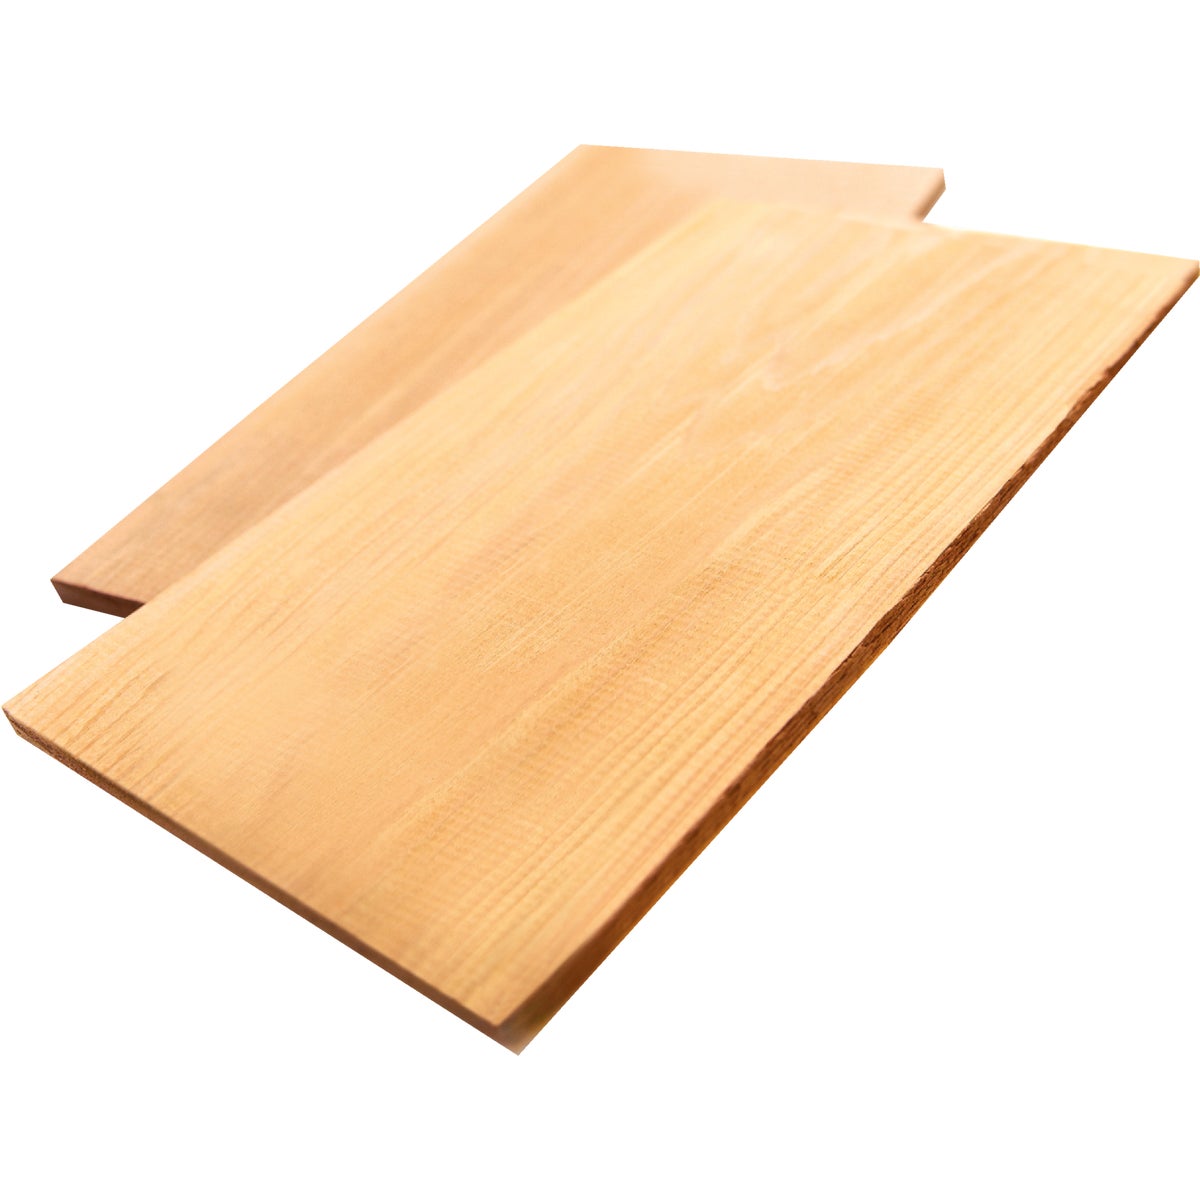 Item 808718, 100% Canadian Cedar grilling planks. Ideal for smoking fish and cheeses.